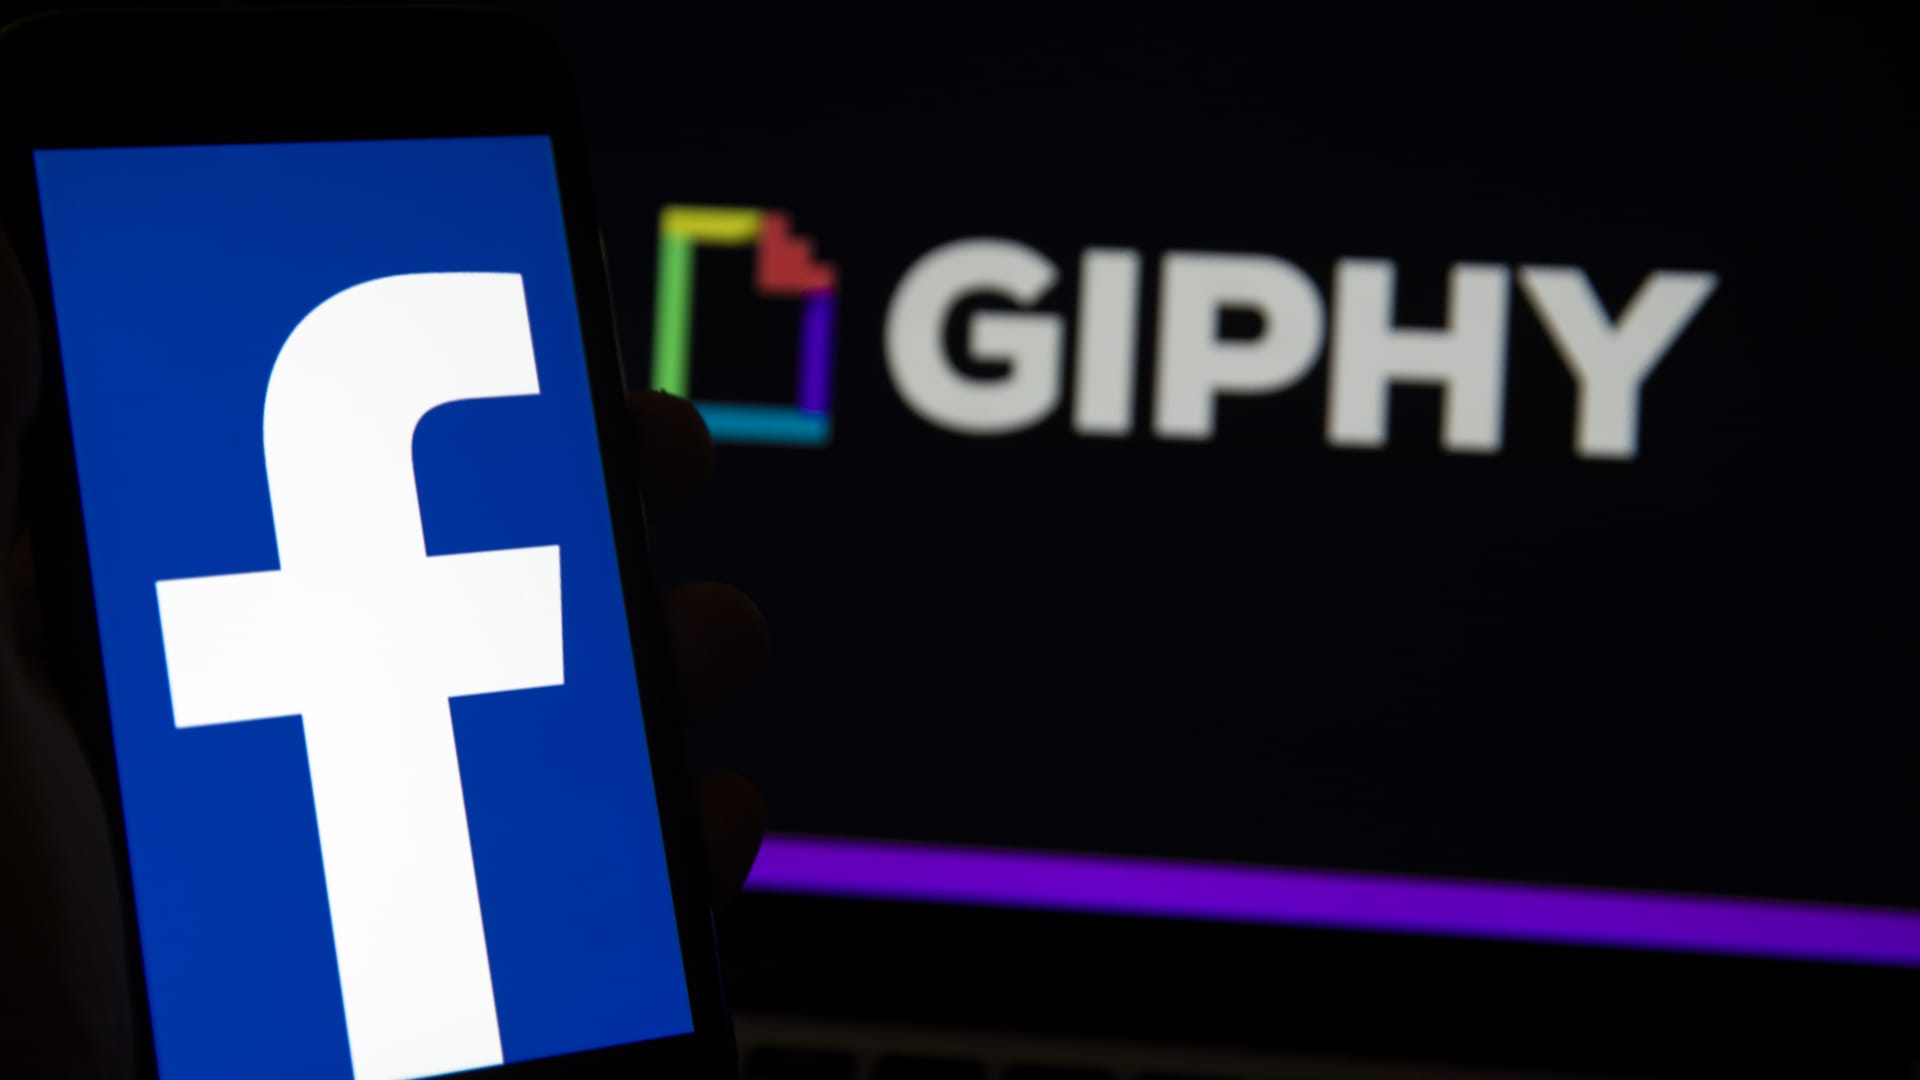 Facebook parent Meta admits defeat after $400 million Giphy deal is blocked by UK regulators